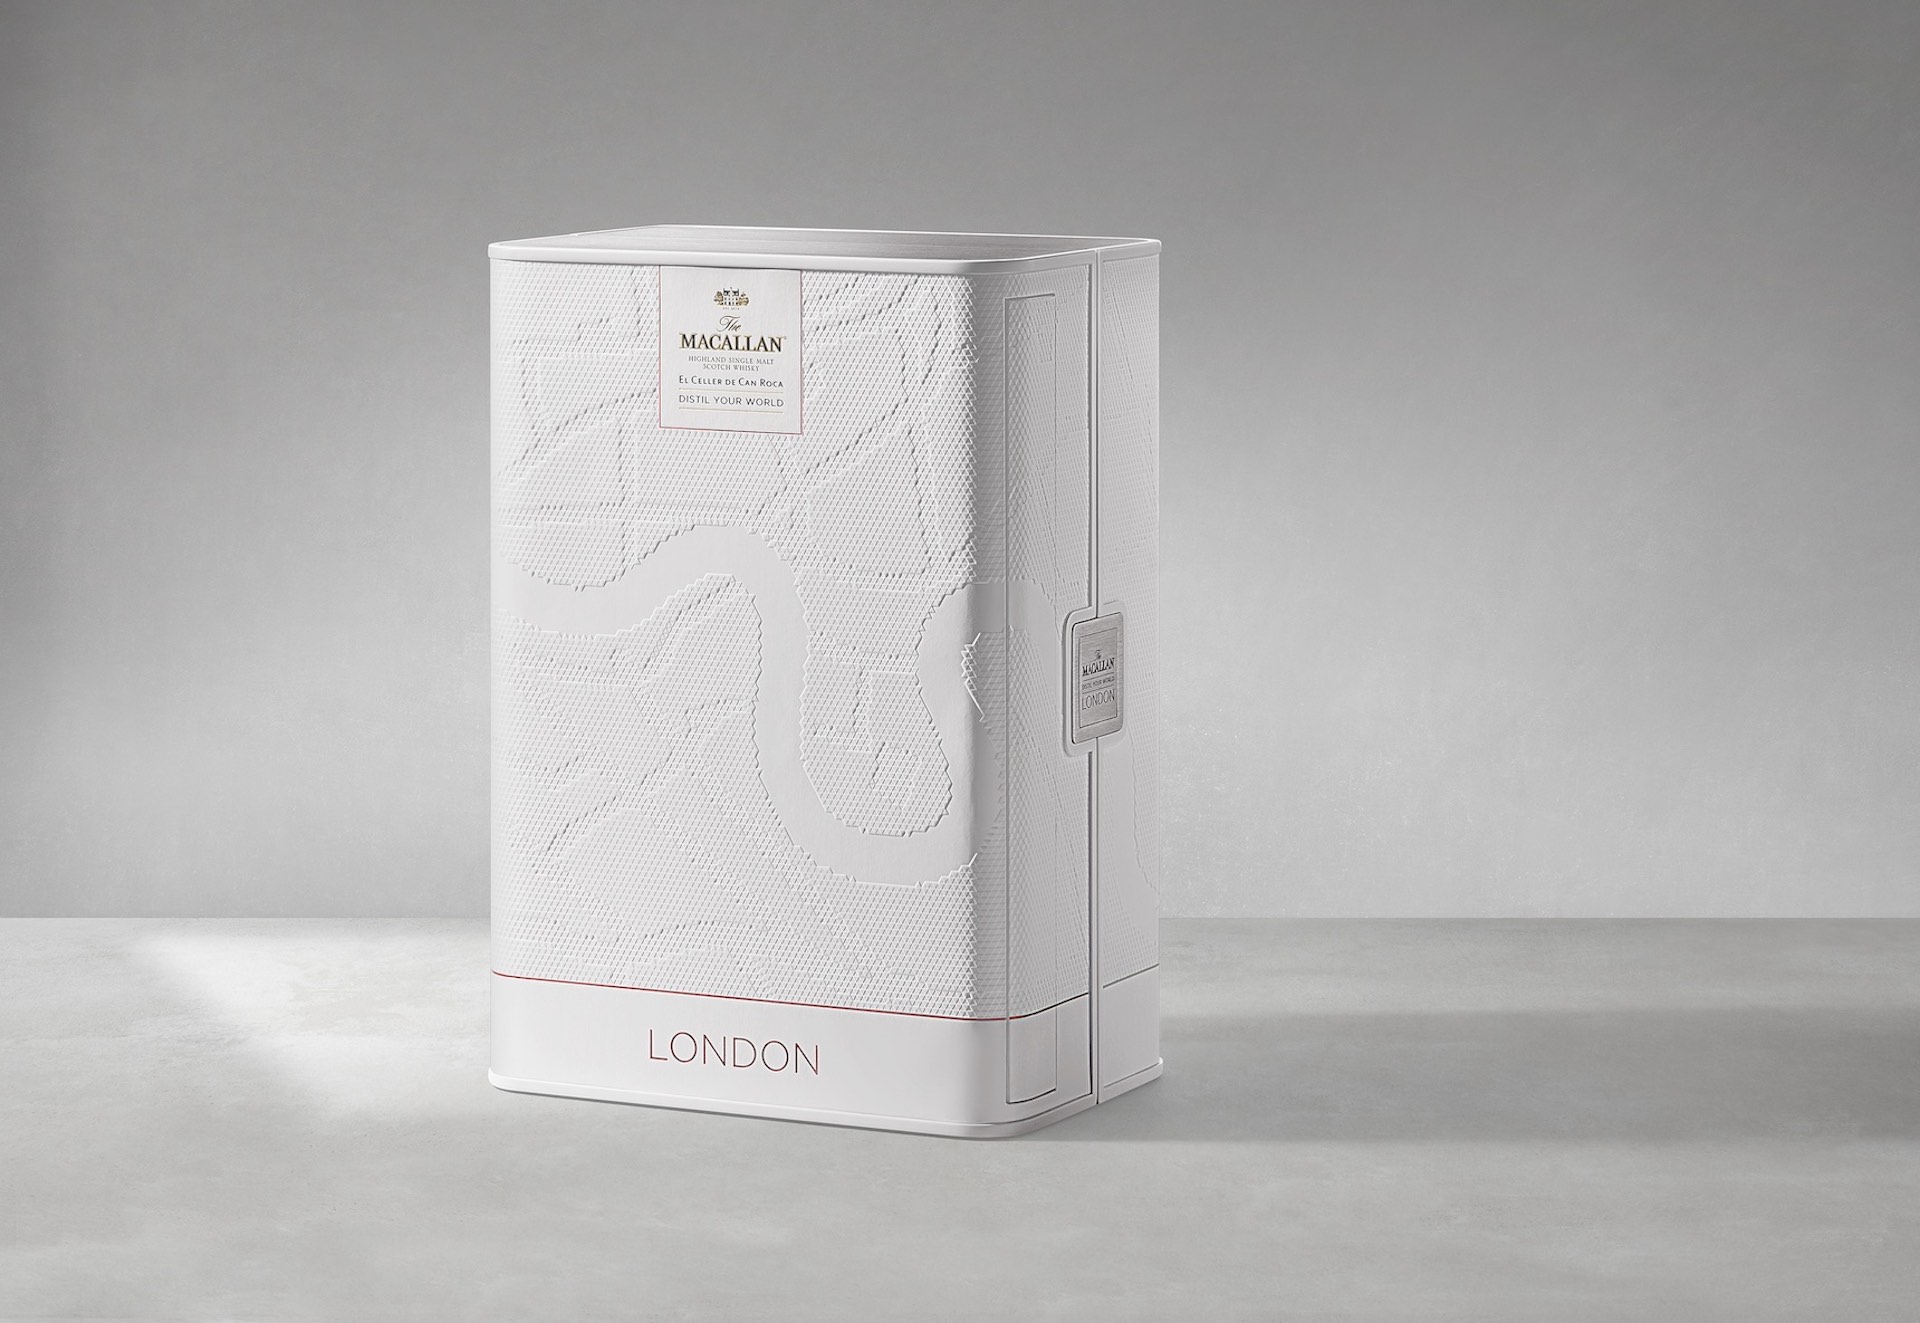 MUSE Design Winners - Distil Your World London Collectors Pack - The Macallan